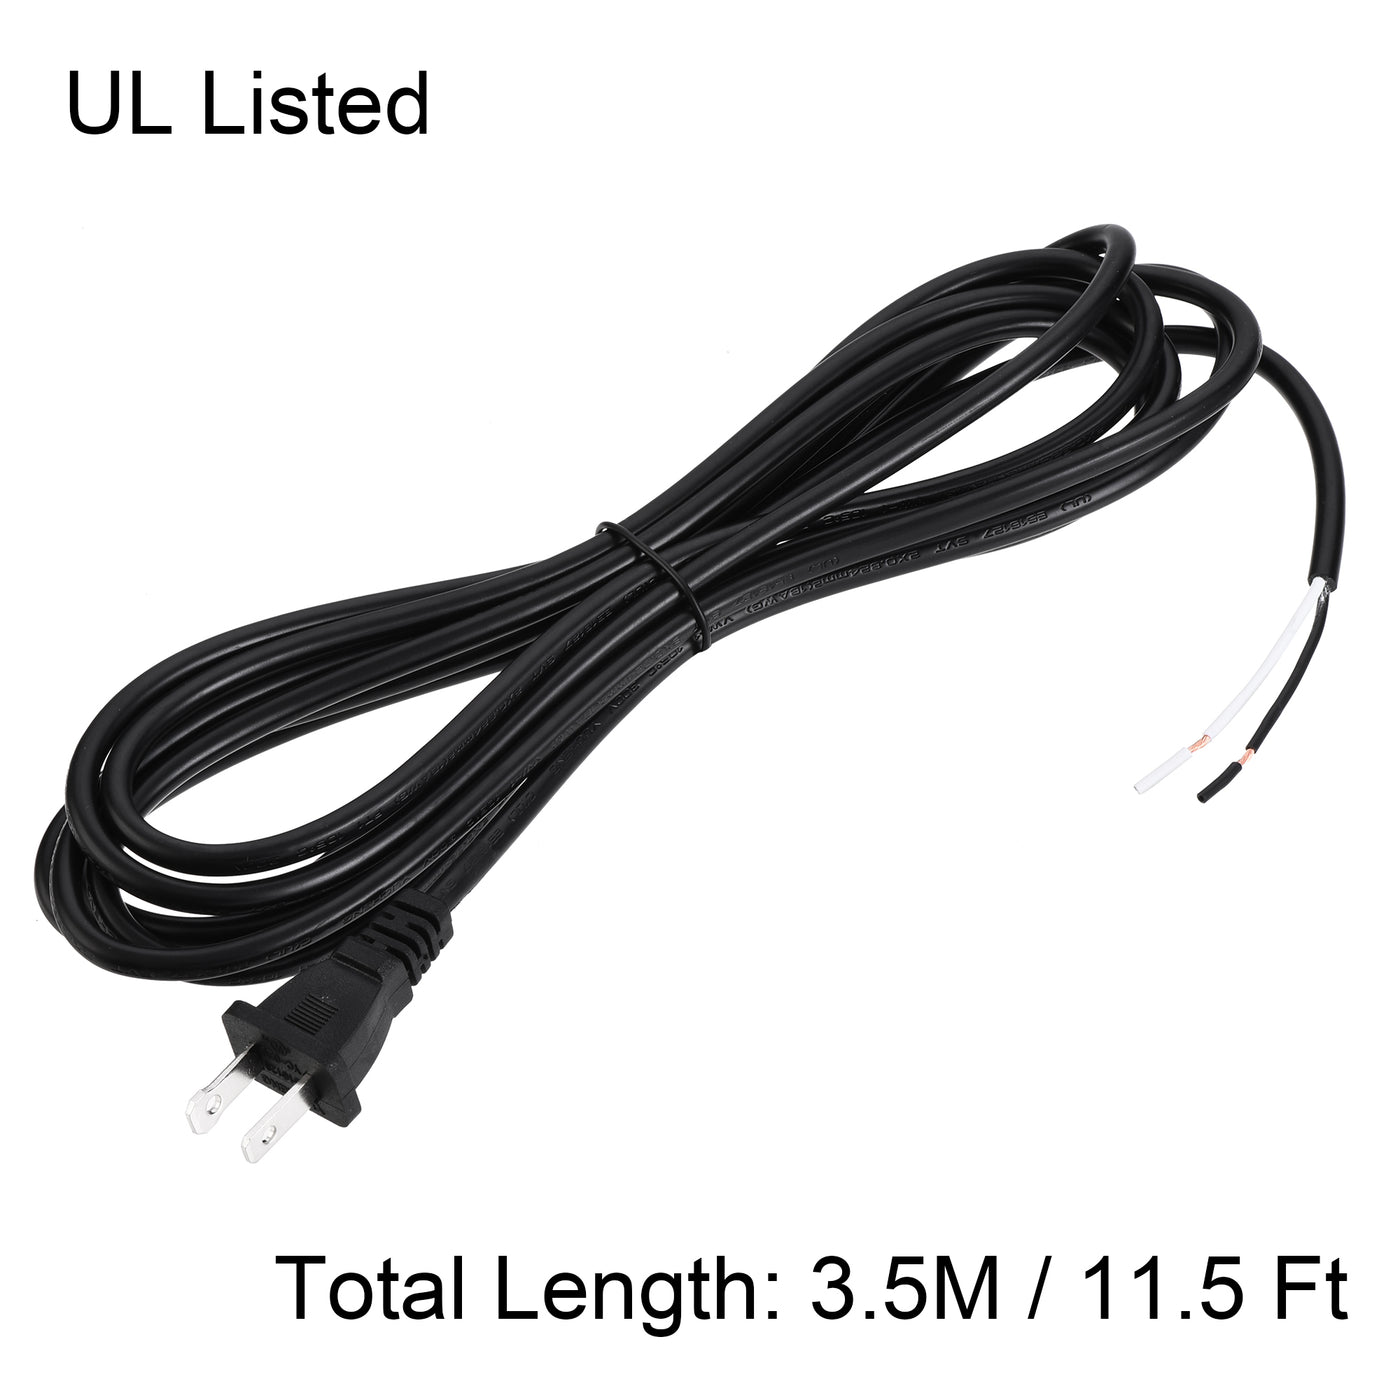 uxcell Uxcell US Plug Lamp Cord, SVT 18AWG Power Wire 3.5M Black, UL Listed, Pack of 3